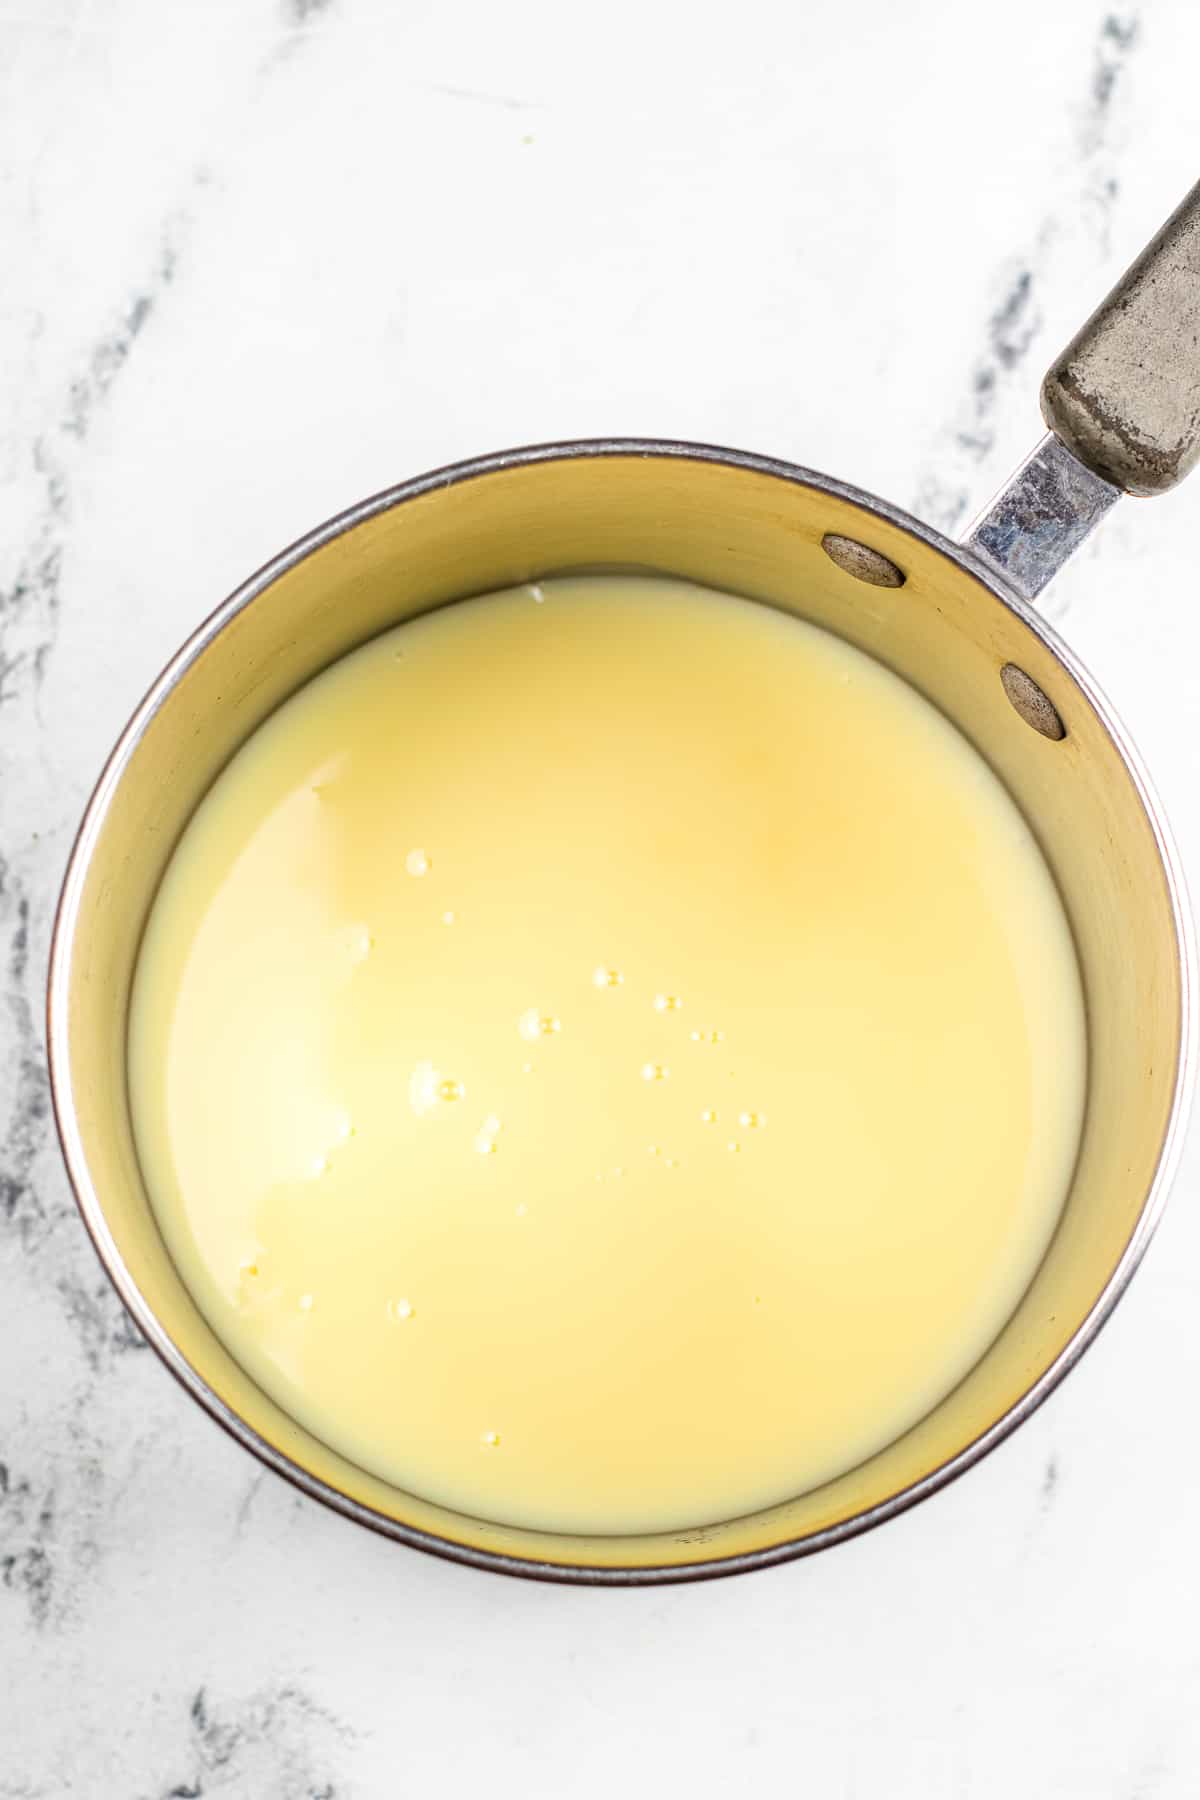 Sweetened condensed milk and butter mixed together in a sauce in a saucepan from overhead on a counter.